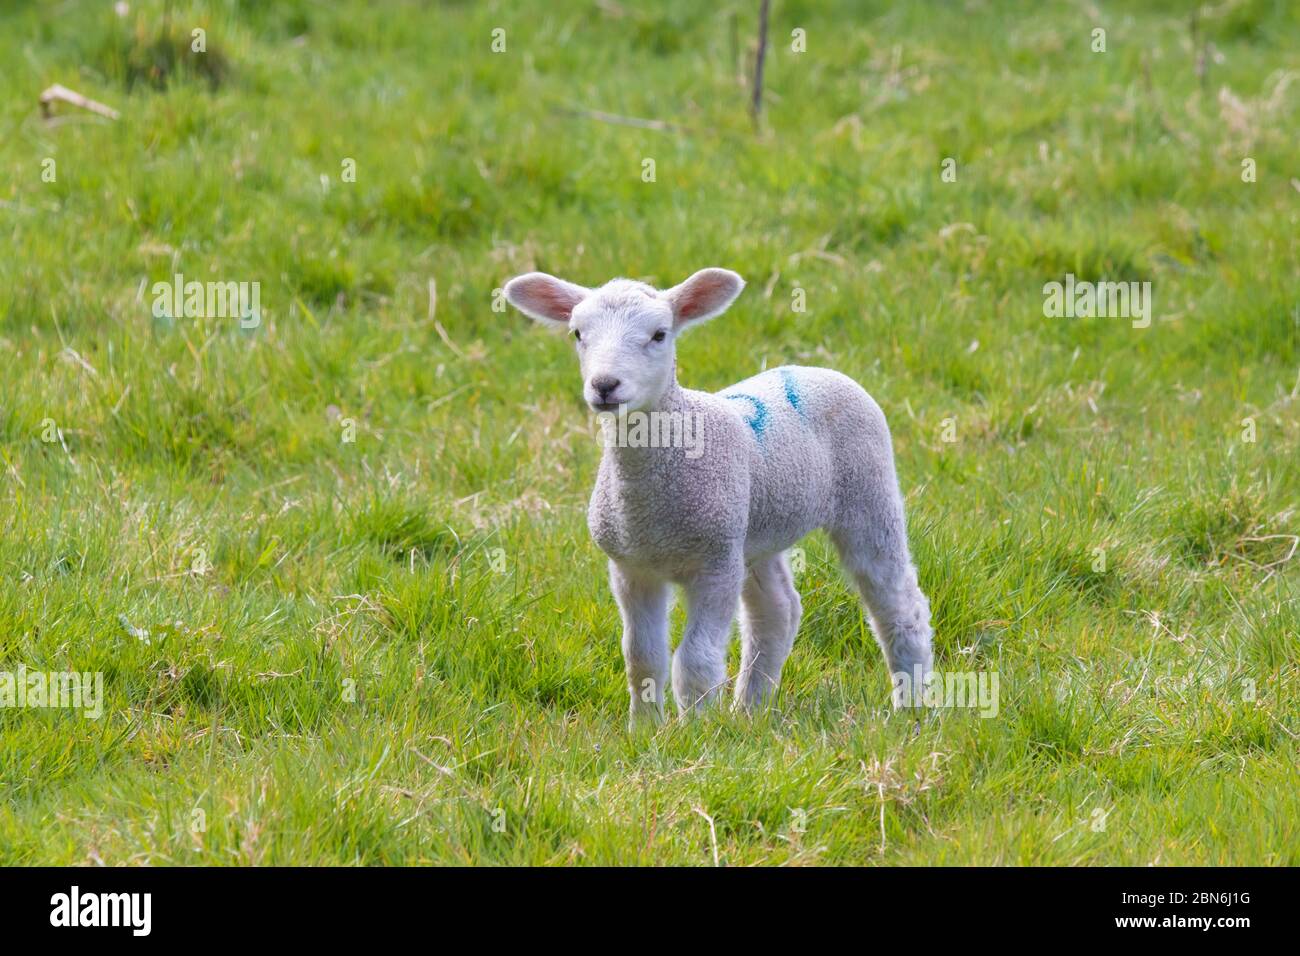 portrait of a lamb with pink ears on grass looking at camera Stock Photo